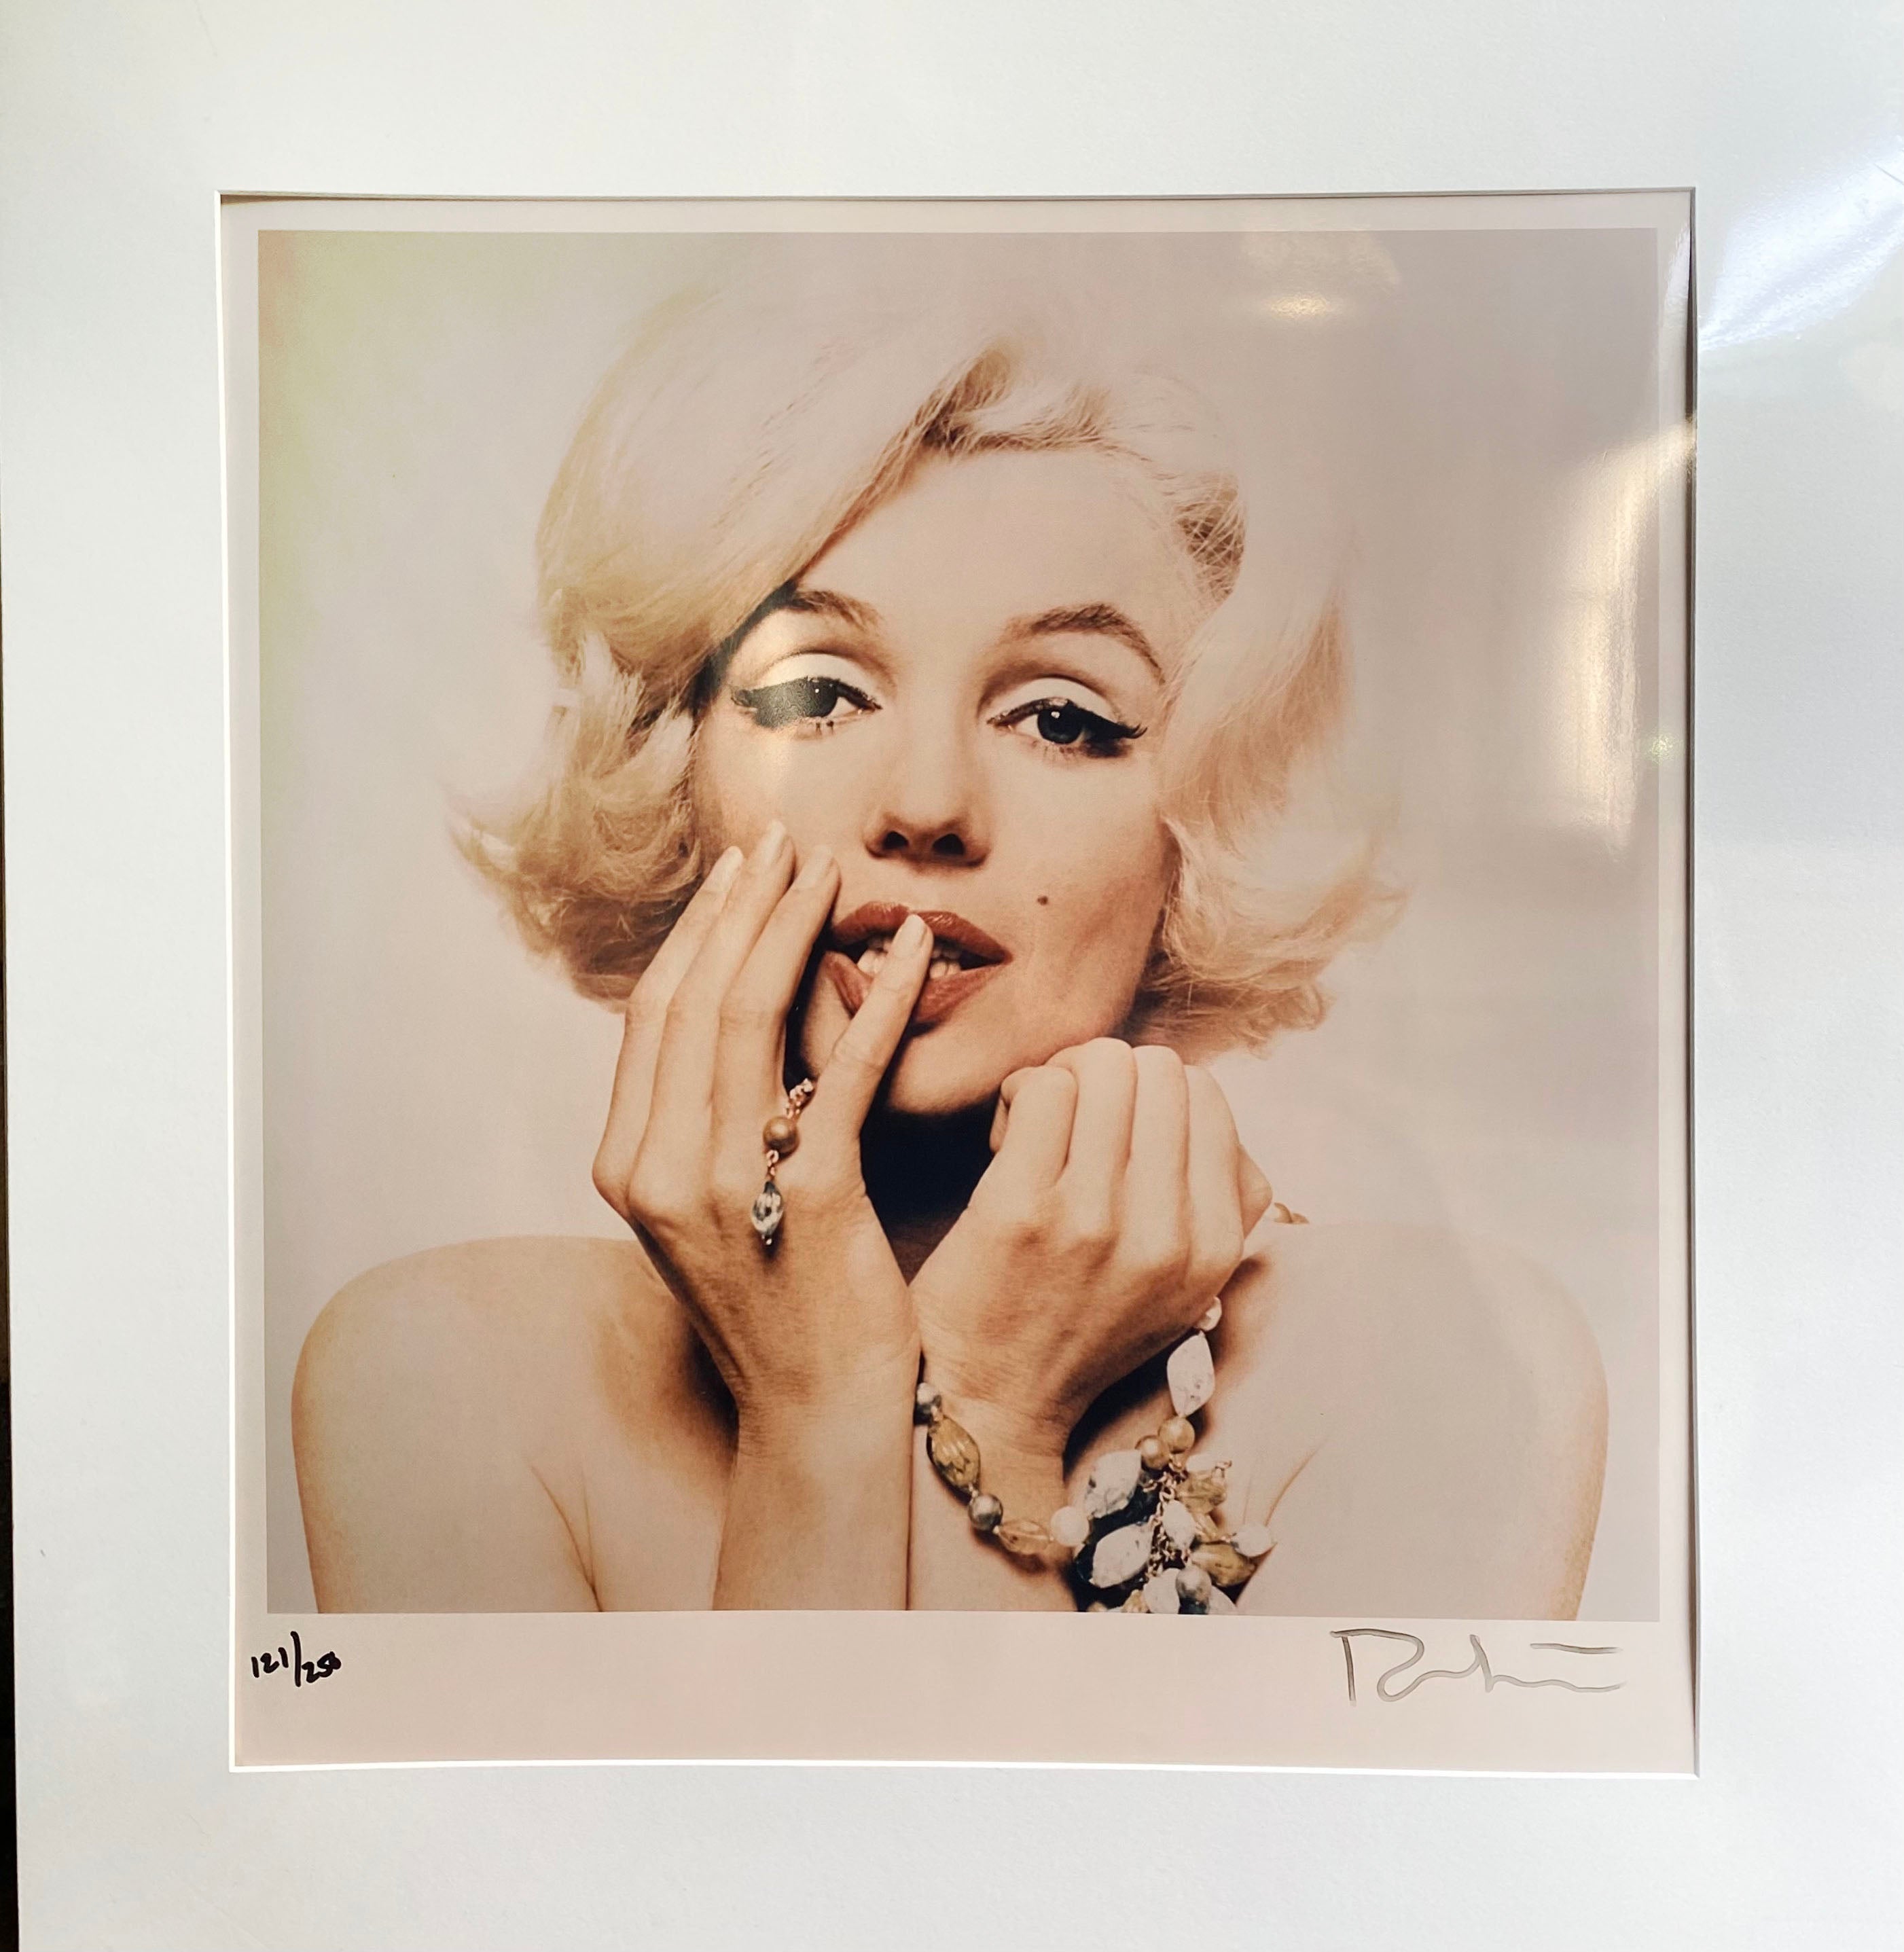 Photograph of Marilyn by Bert Stern. 
silver print by Bert Stern.
1980
The last sitting 
Numbered 121/256
Signed lower right 
With frame: H 69 cm x W 65 cm
Unframed: H 53 cm x W 49 cm. 


A unique image from one of the most important photo